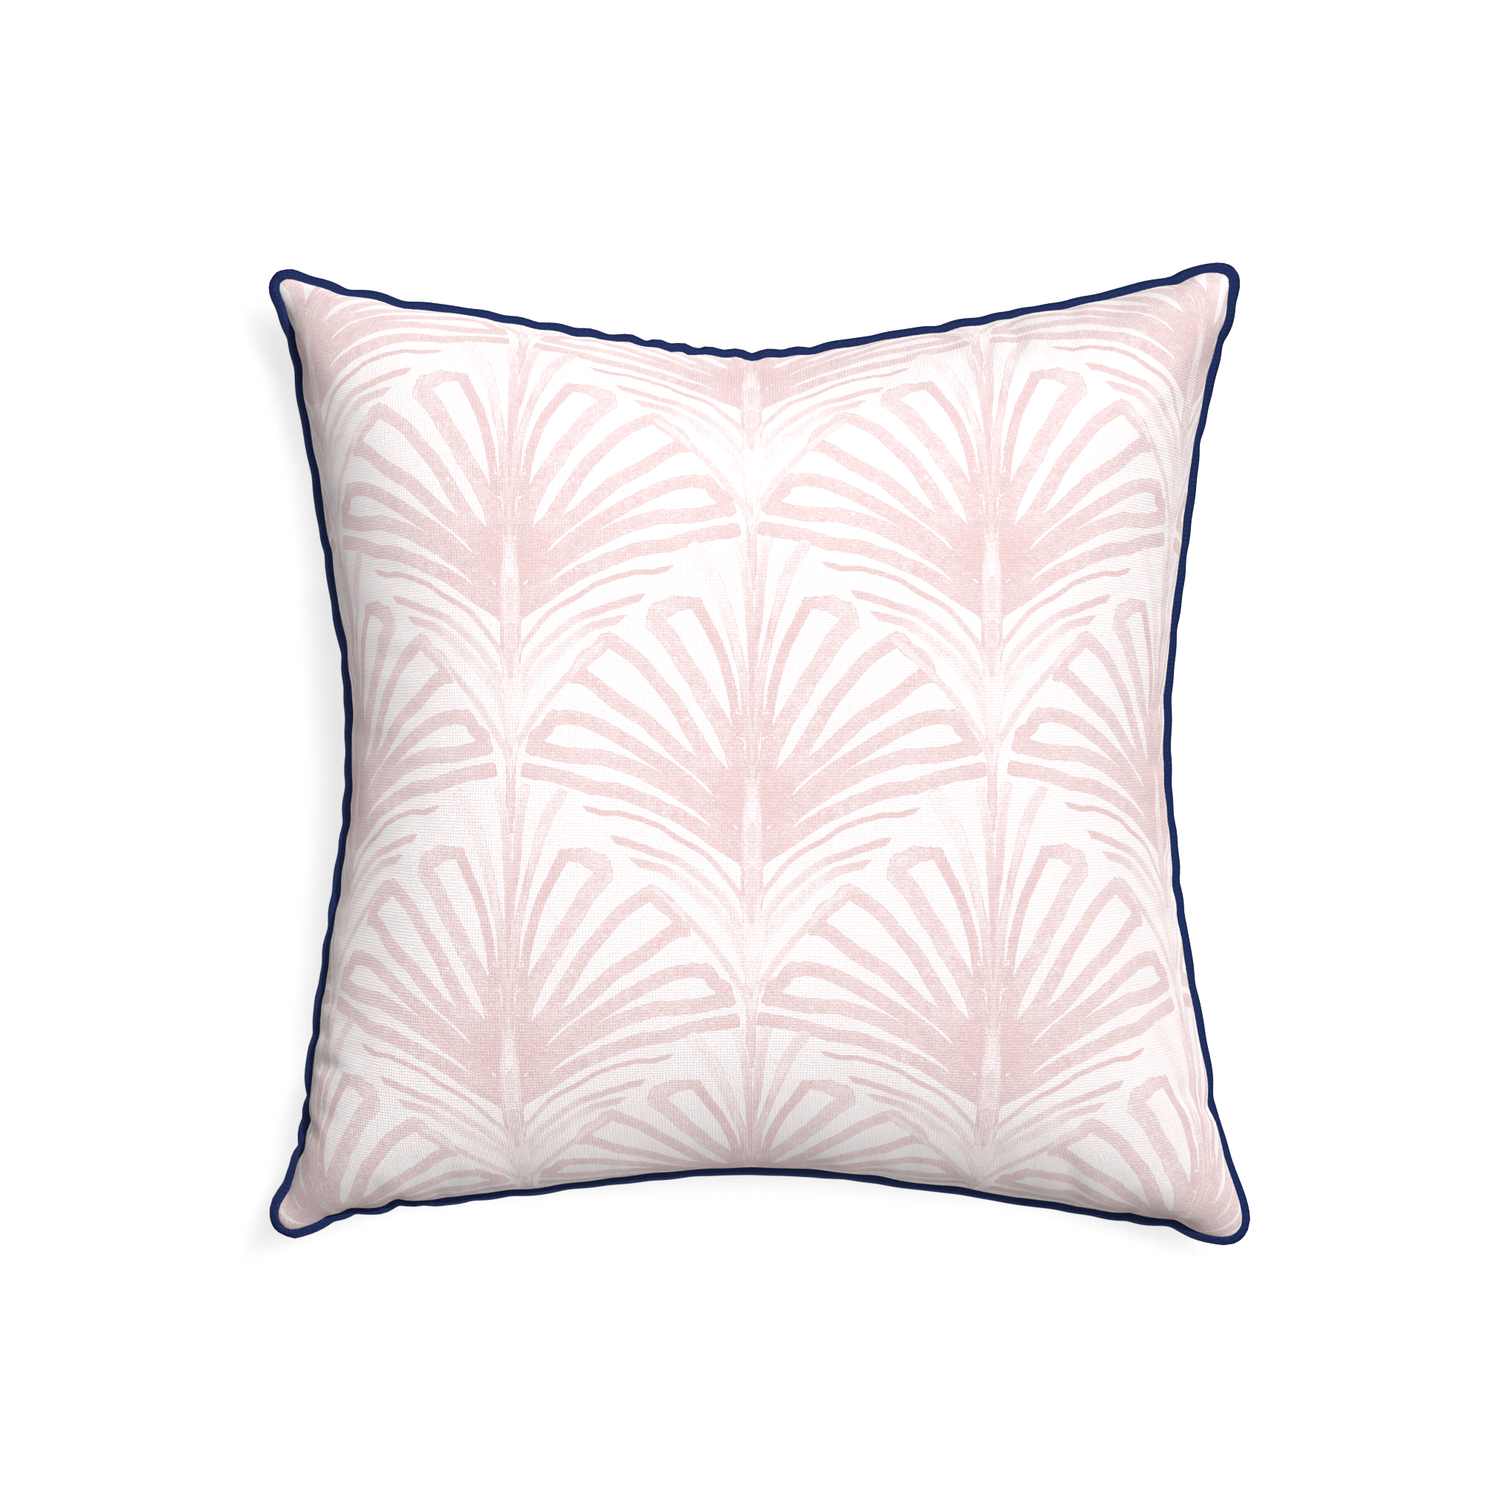 22-square suzy rose custom pillow with midnight piping on white background